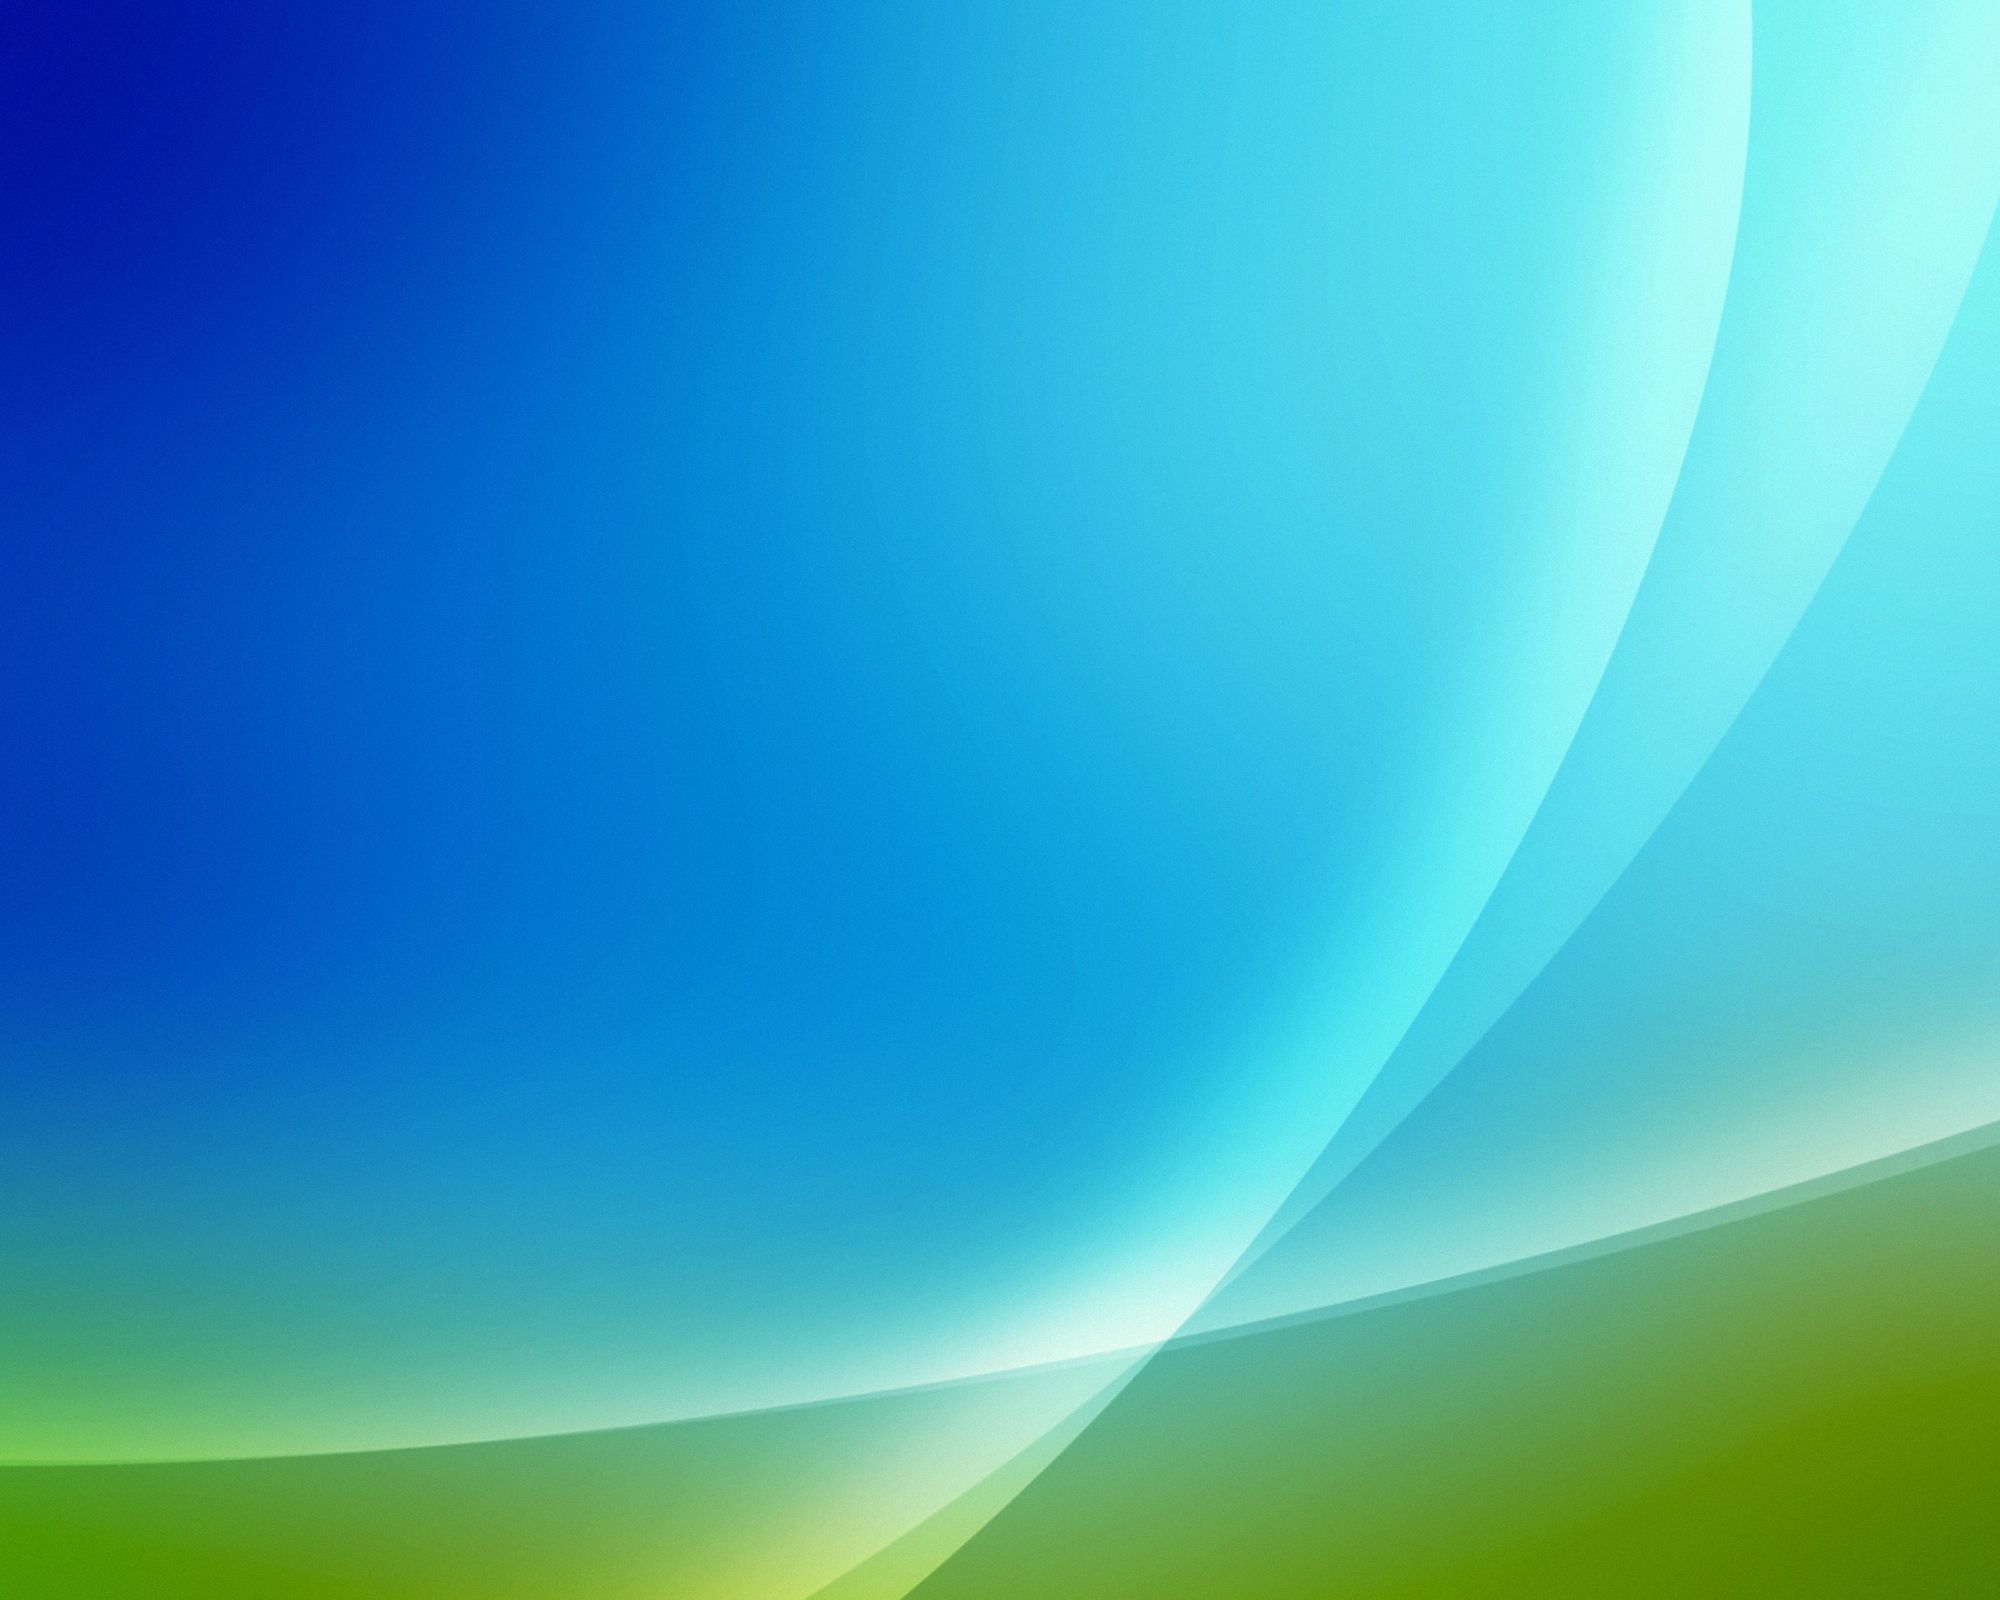 abstract blue and green backgrounds